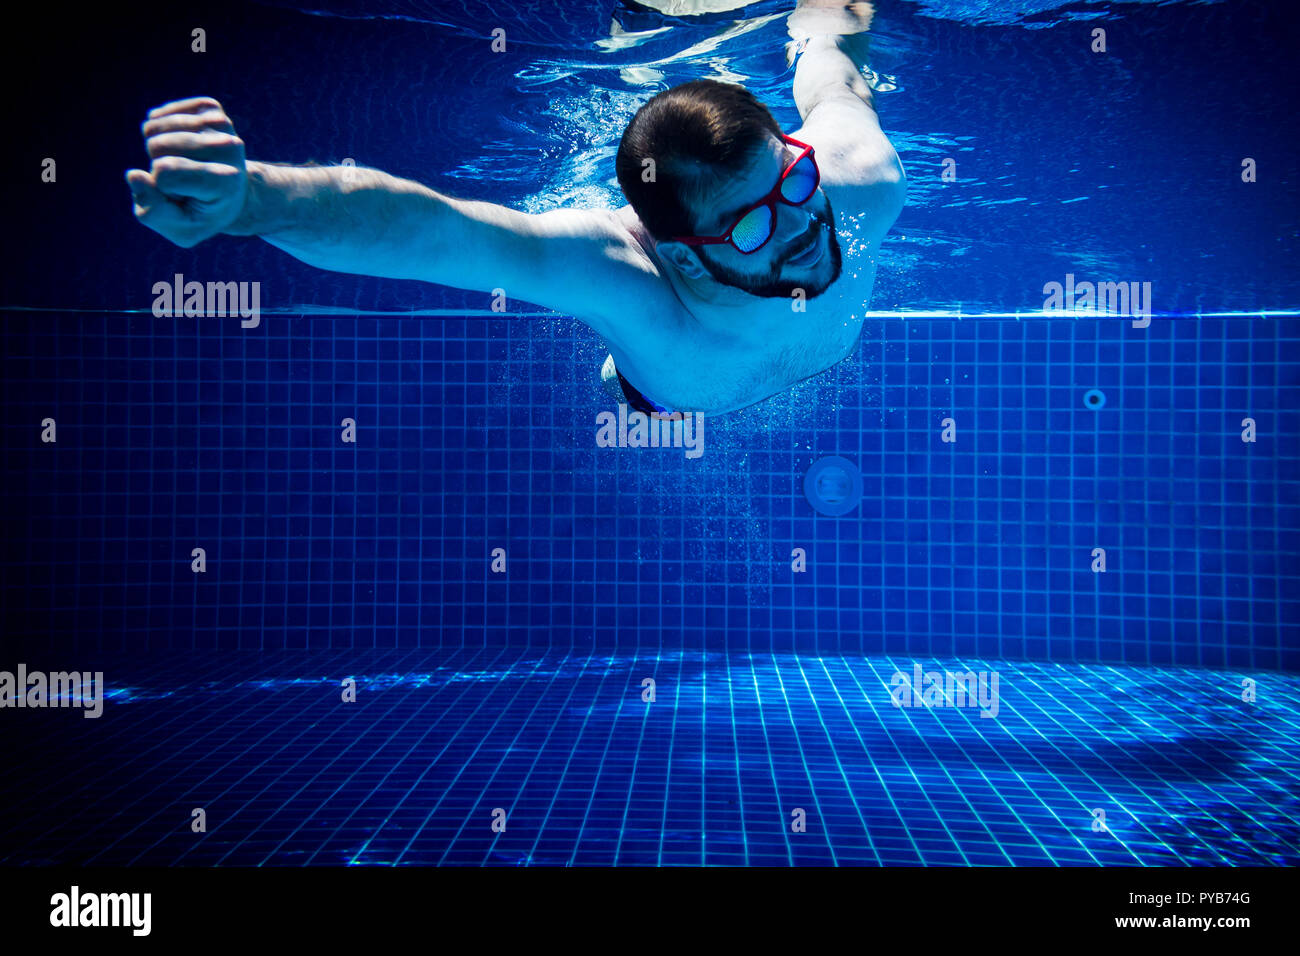 young man with sunglasses enjoying the swimming pool abstract summer fun underwater swimming jump diving background Stock Photo